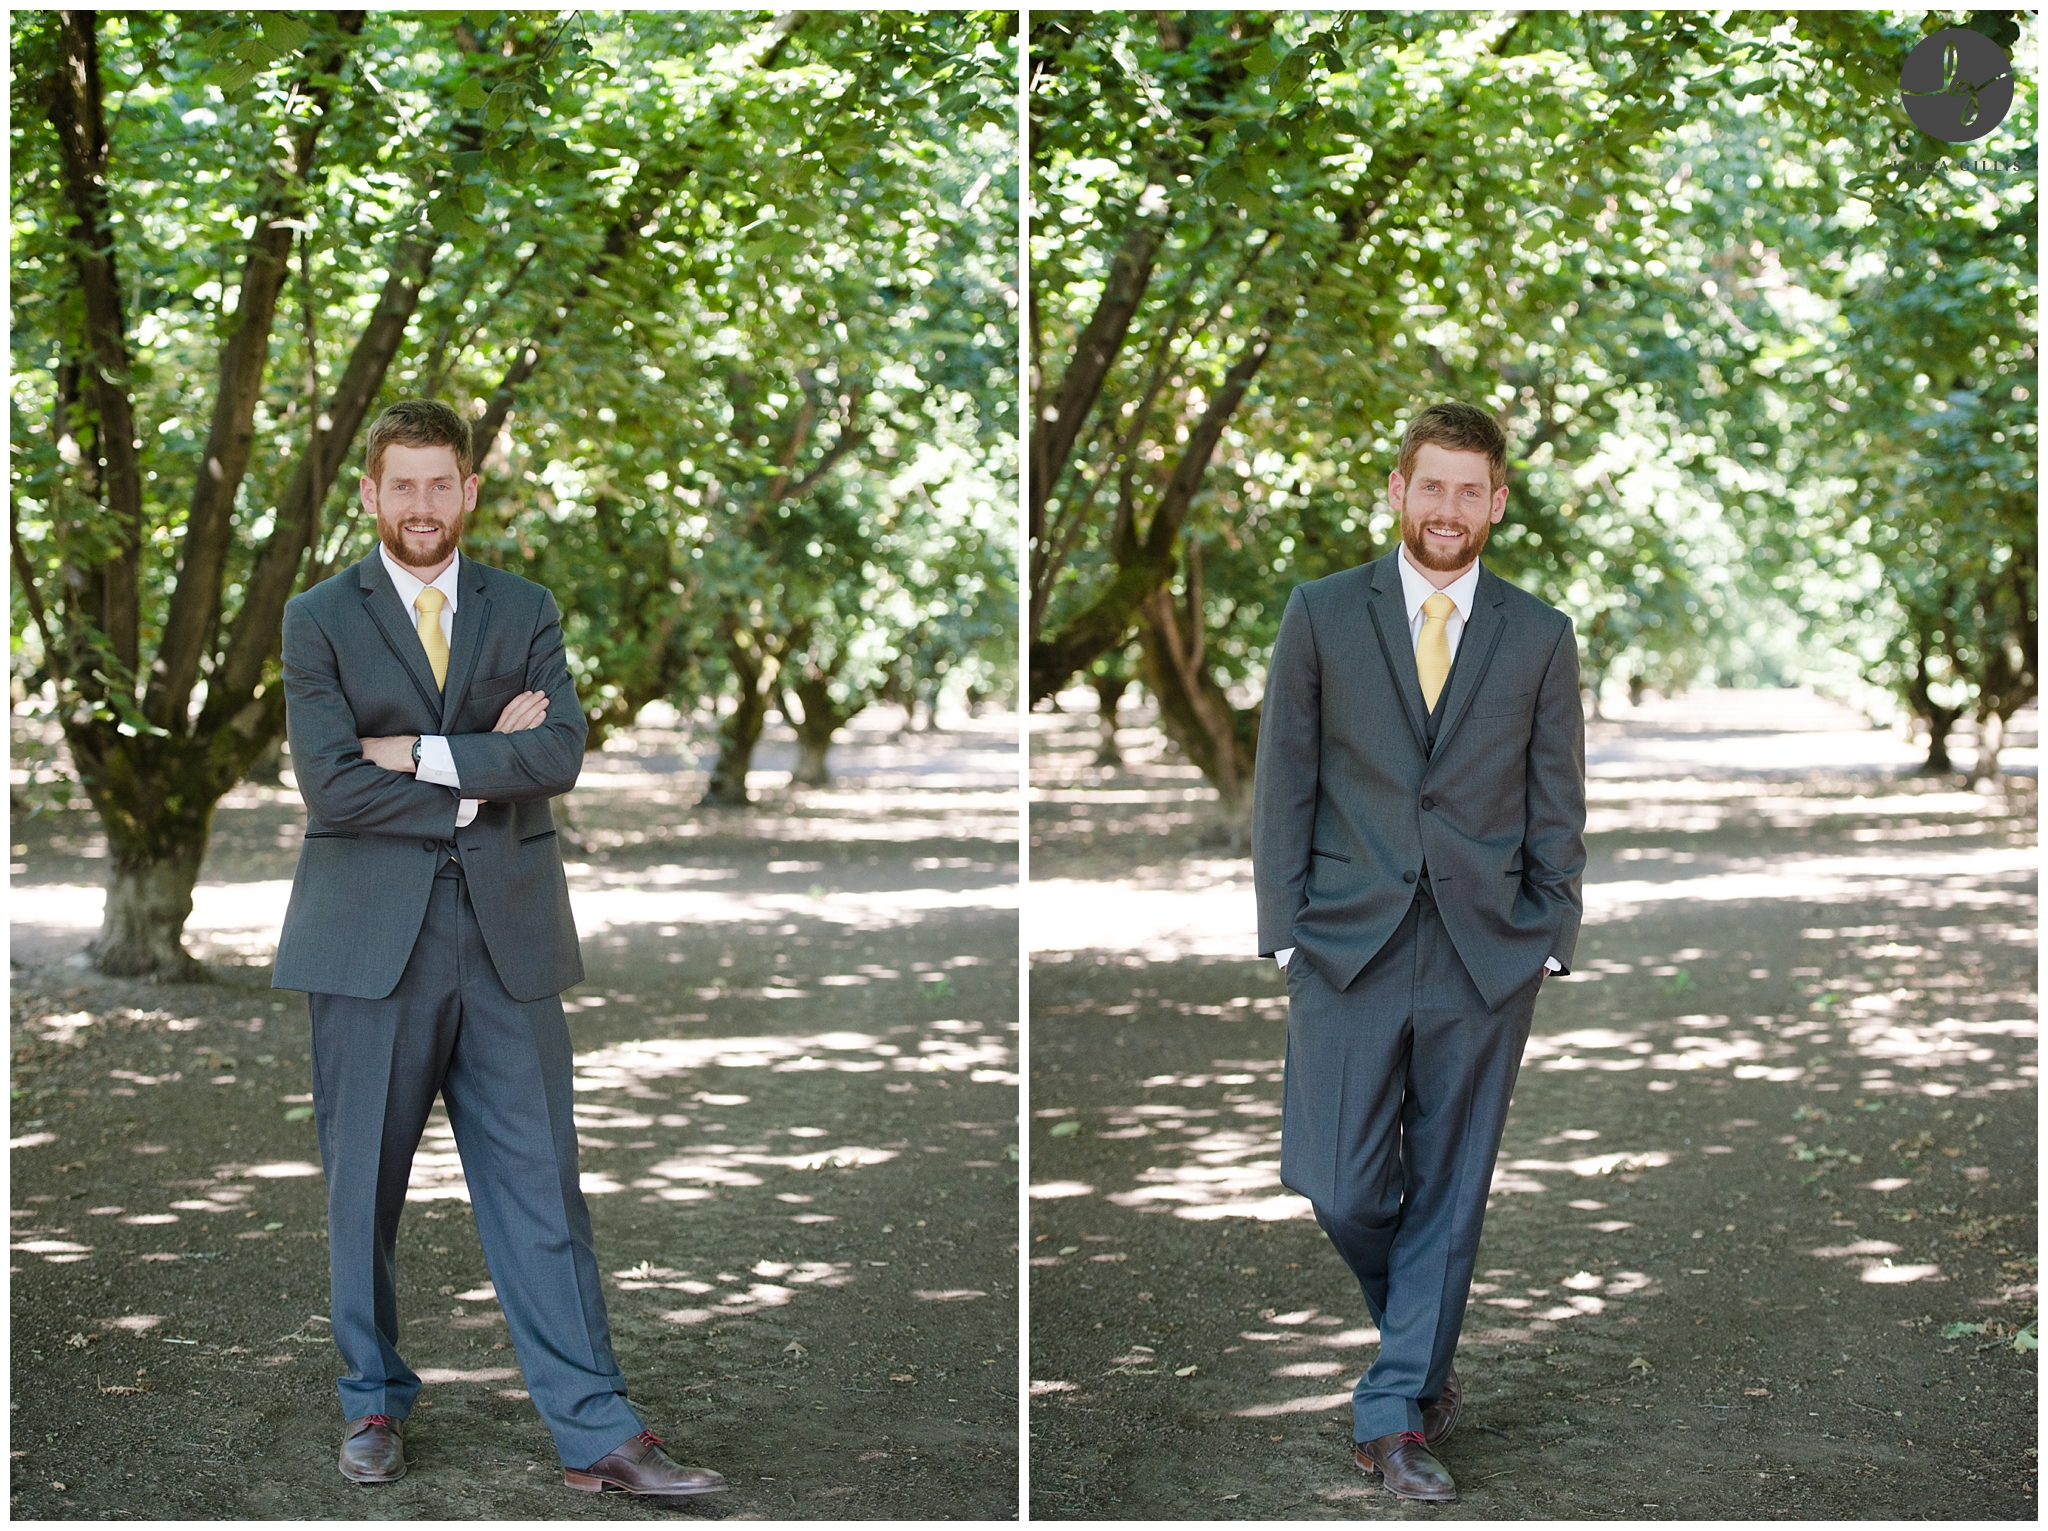 Outdoor wedding picture of groom | Lydia Gillis Photography 